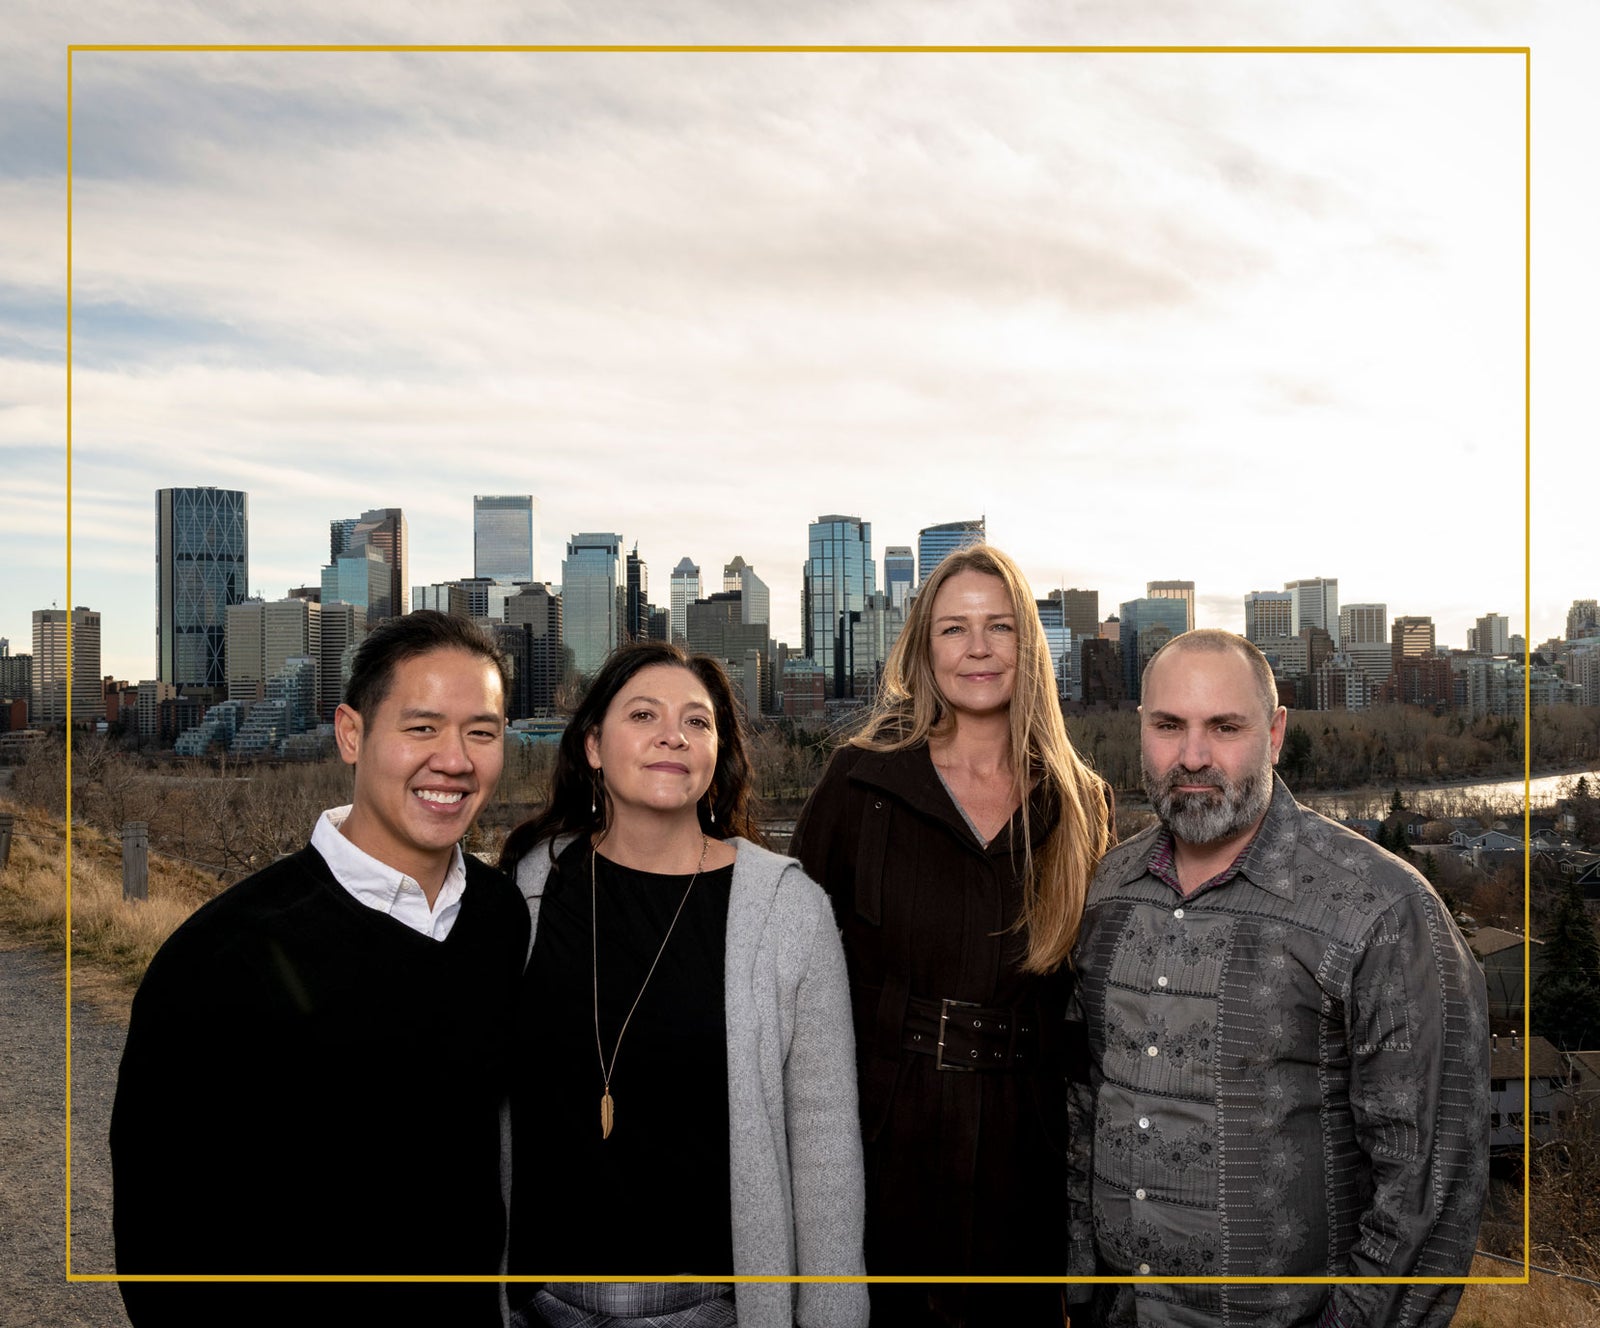 Trung Bien Real Estate Team - Calgary best Real Estate Team  - Buy/ Sell  house and homes